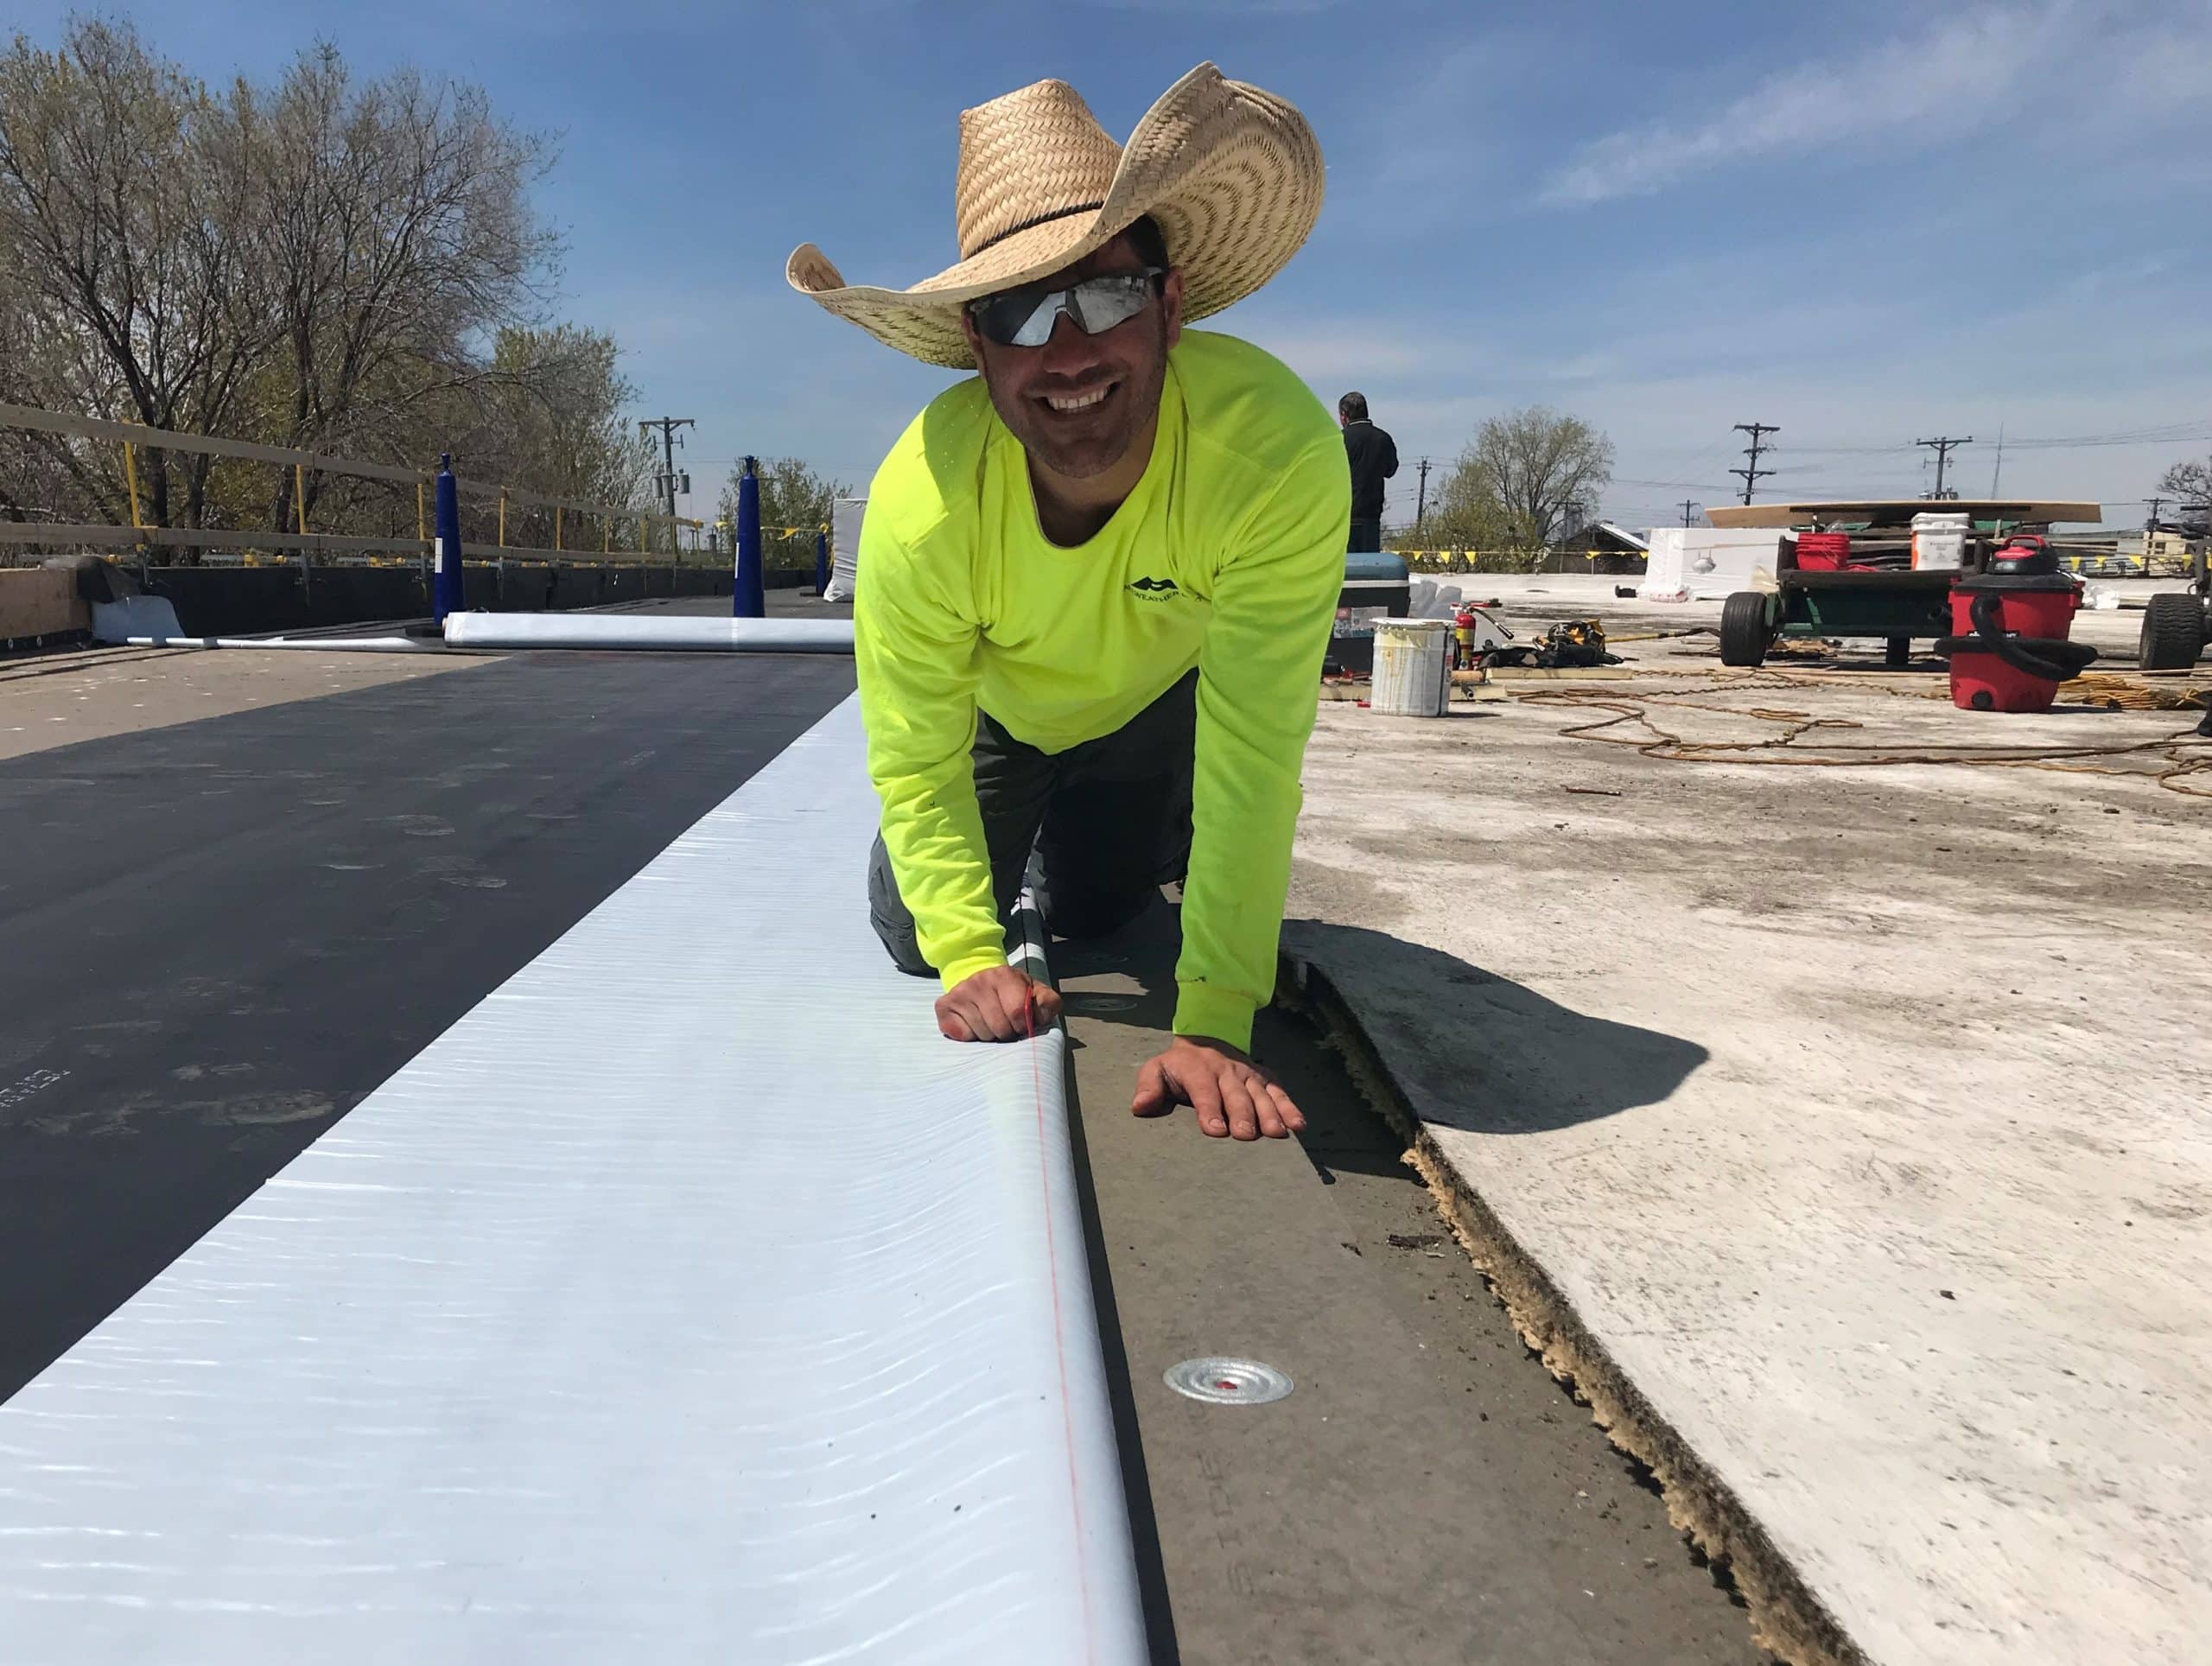 commercial roofing jobs in minnesota